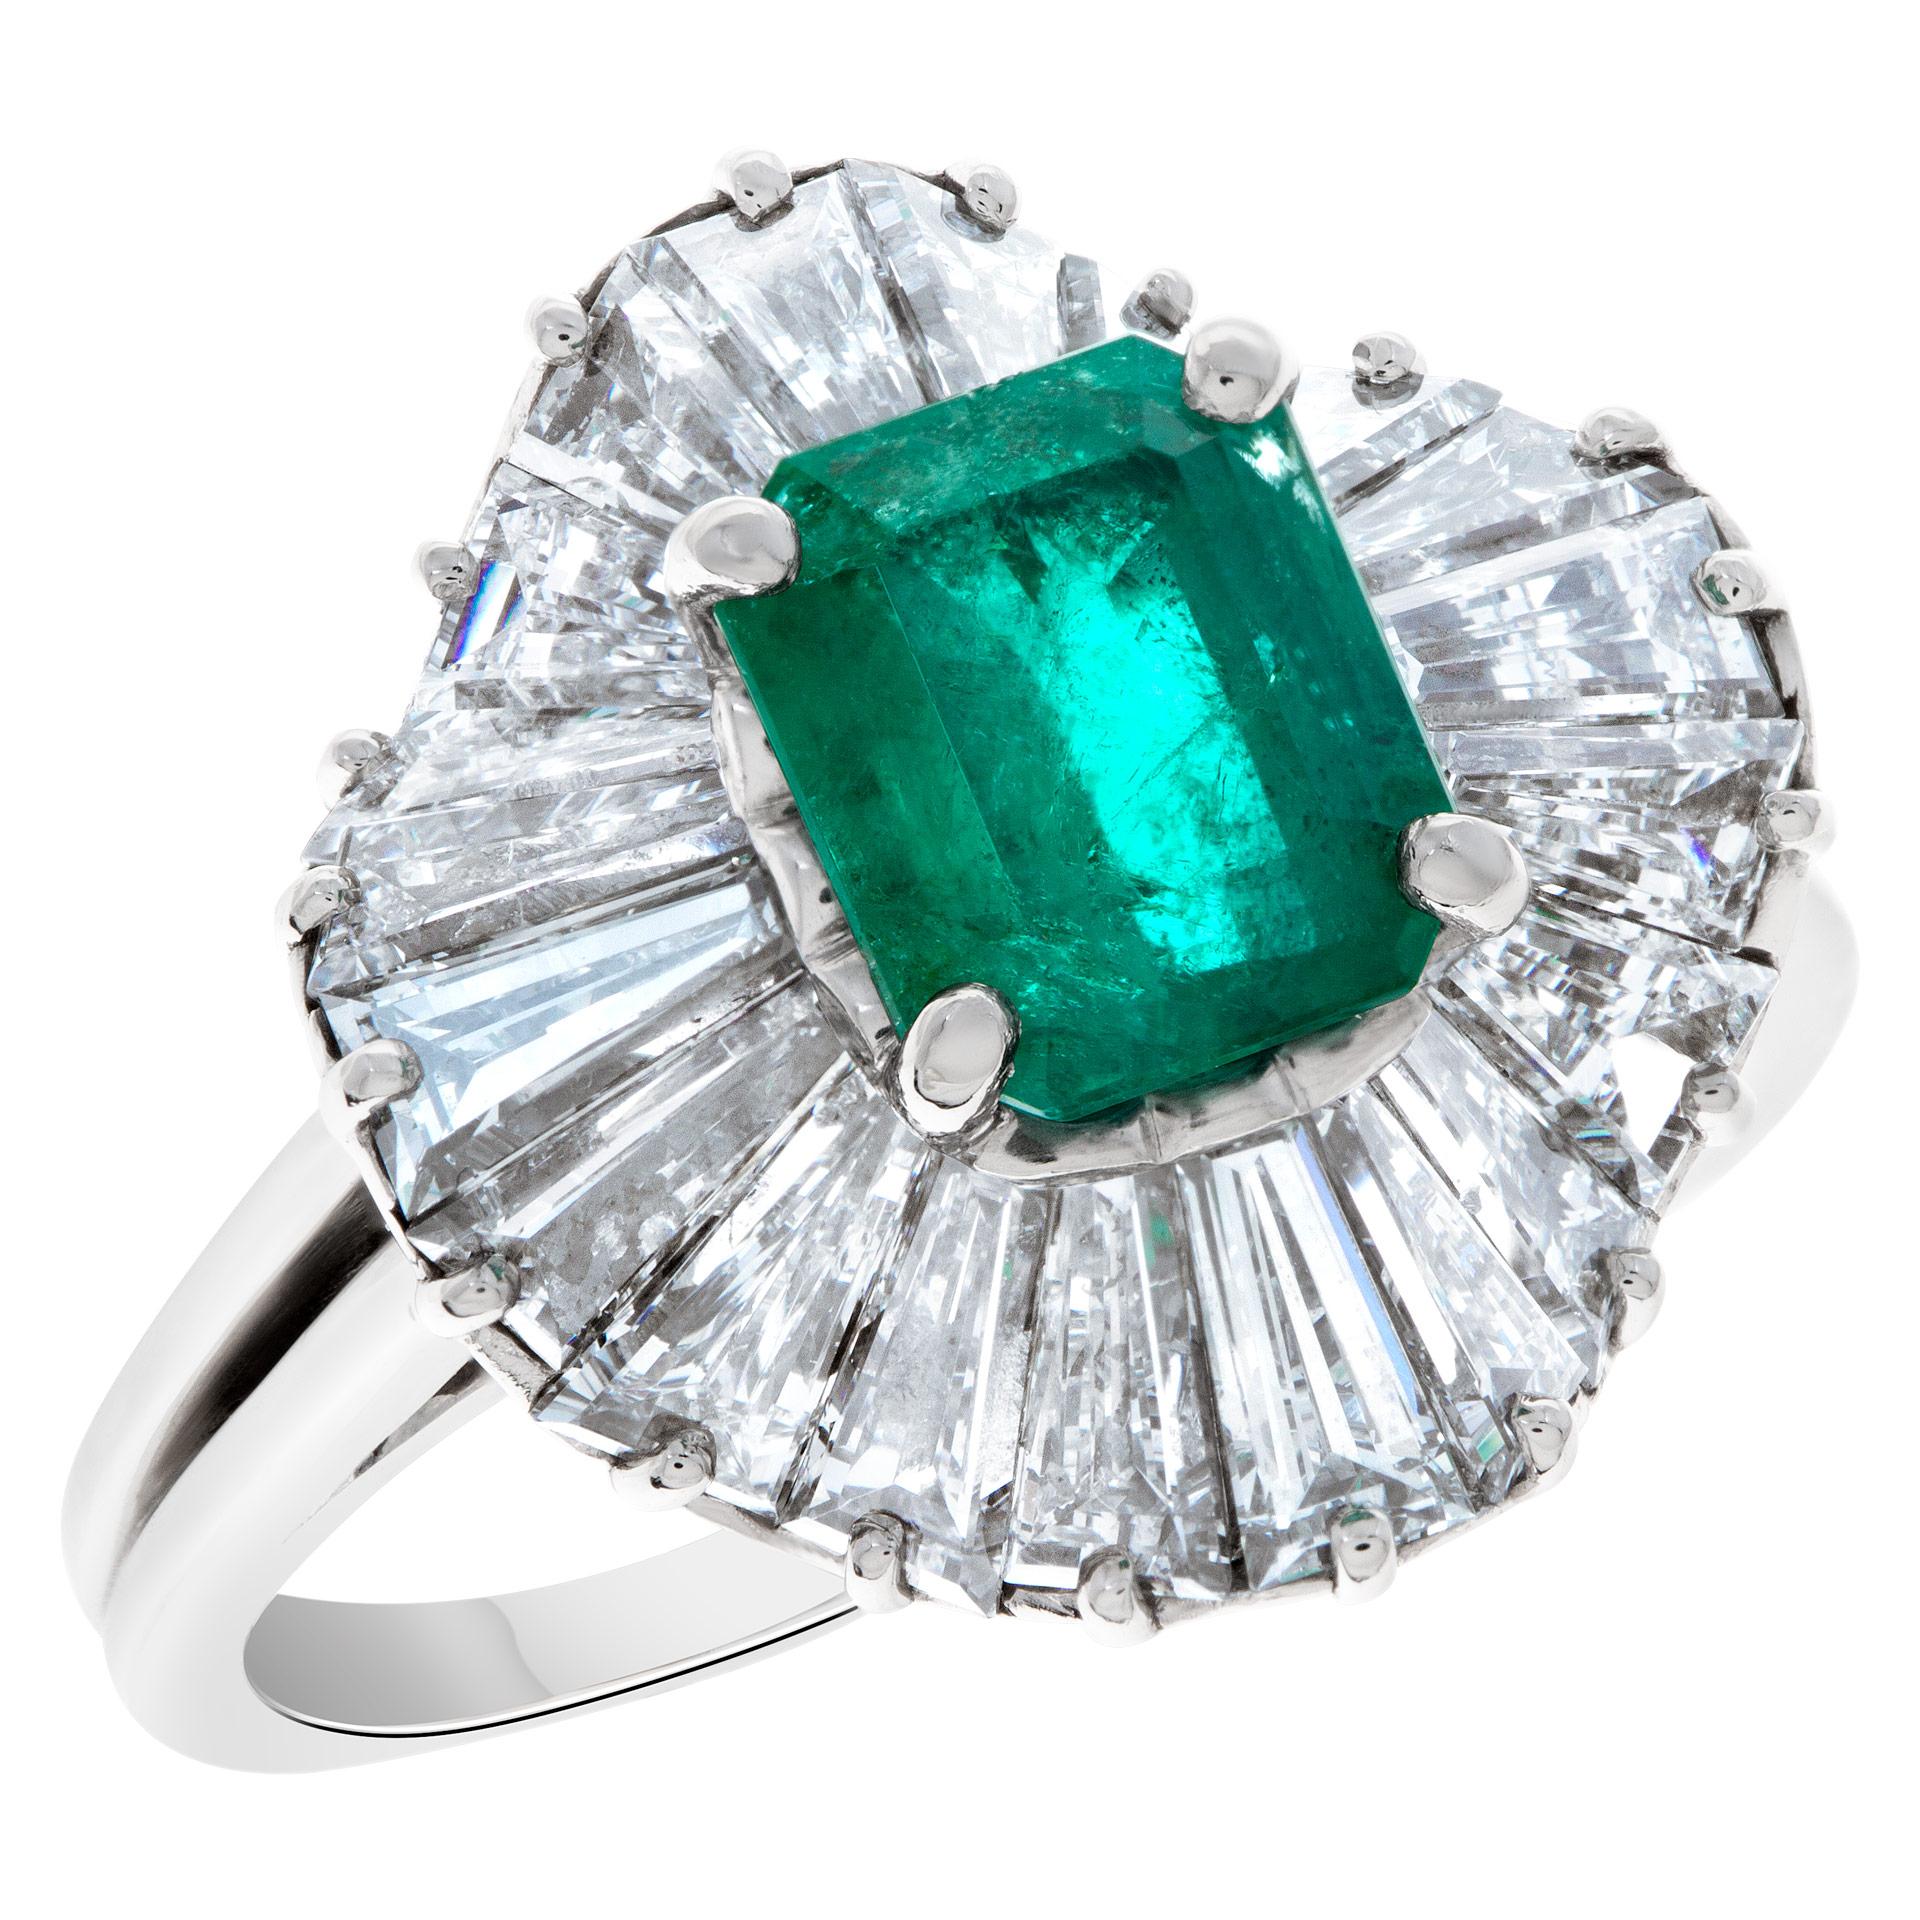 Stunning Diamond and Emerald Platinum ring with 1.50 carat green emerald surrounded by 1.50 carats in baguette diamond accents G-H color, VS clarity. Size 6.5  This Diamond/Emerald ring is currently size 6.5 and some items can be sized up or down,